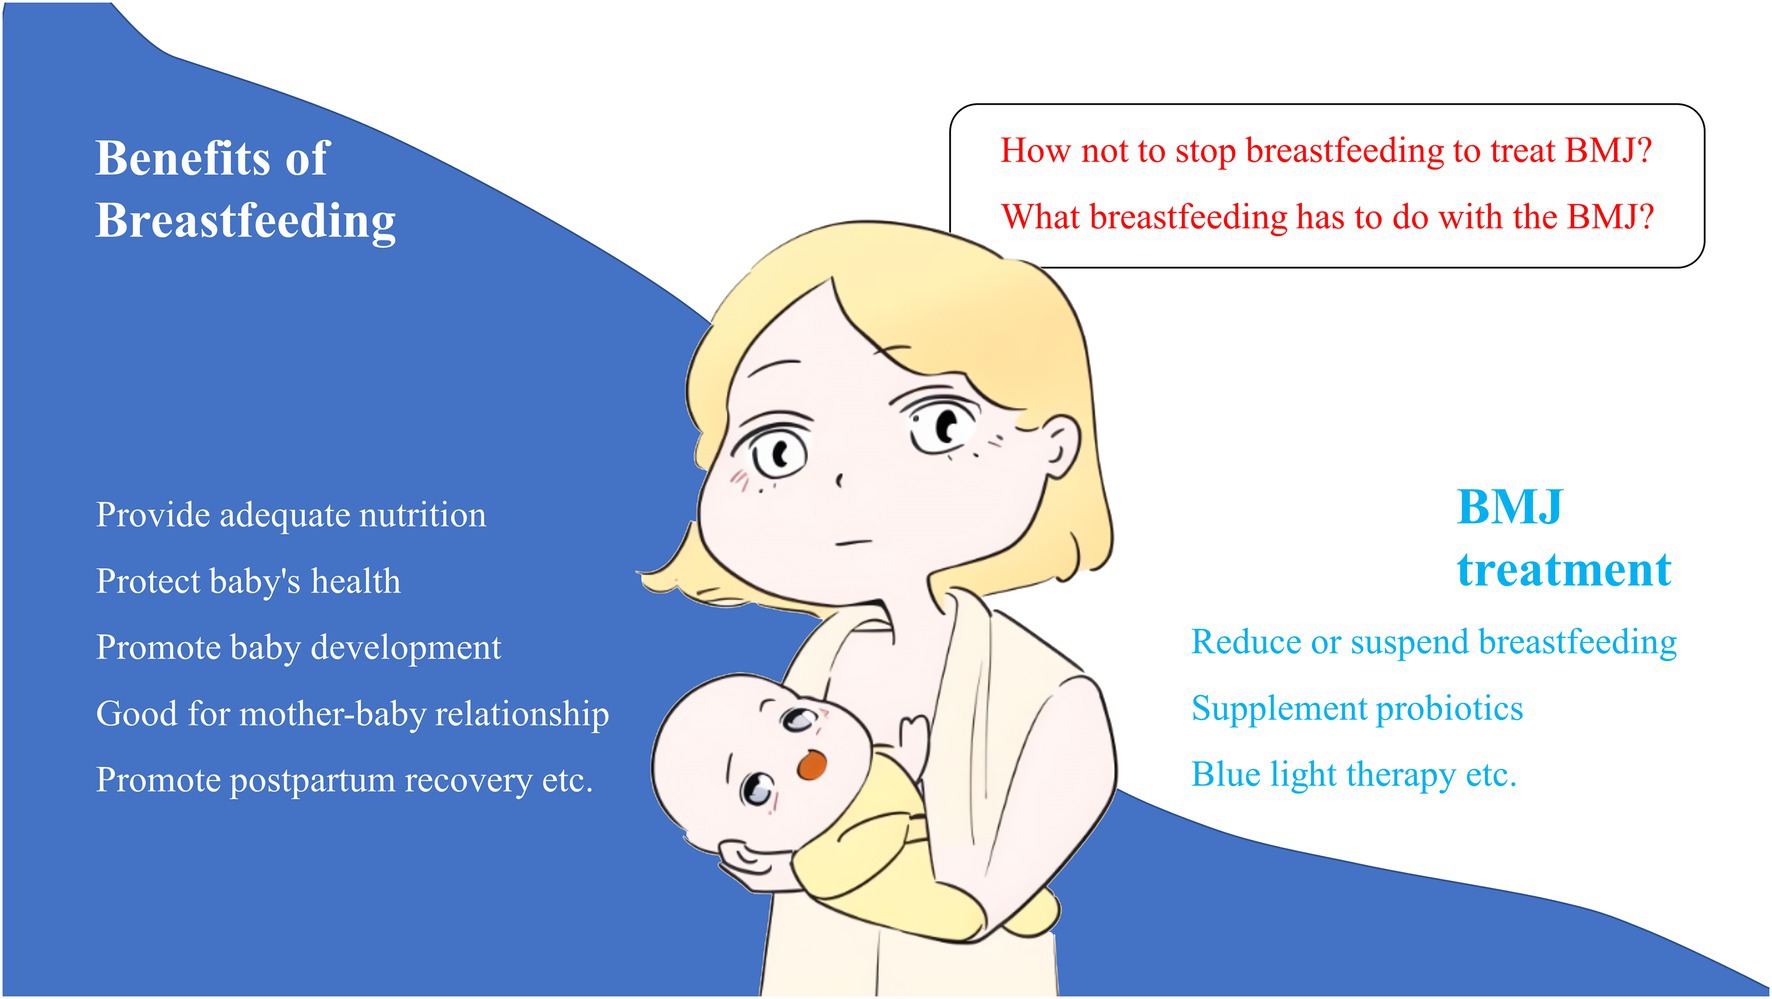 10 Facts About A Mother's Diet And Breastfeeding